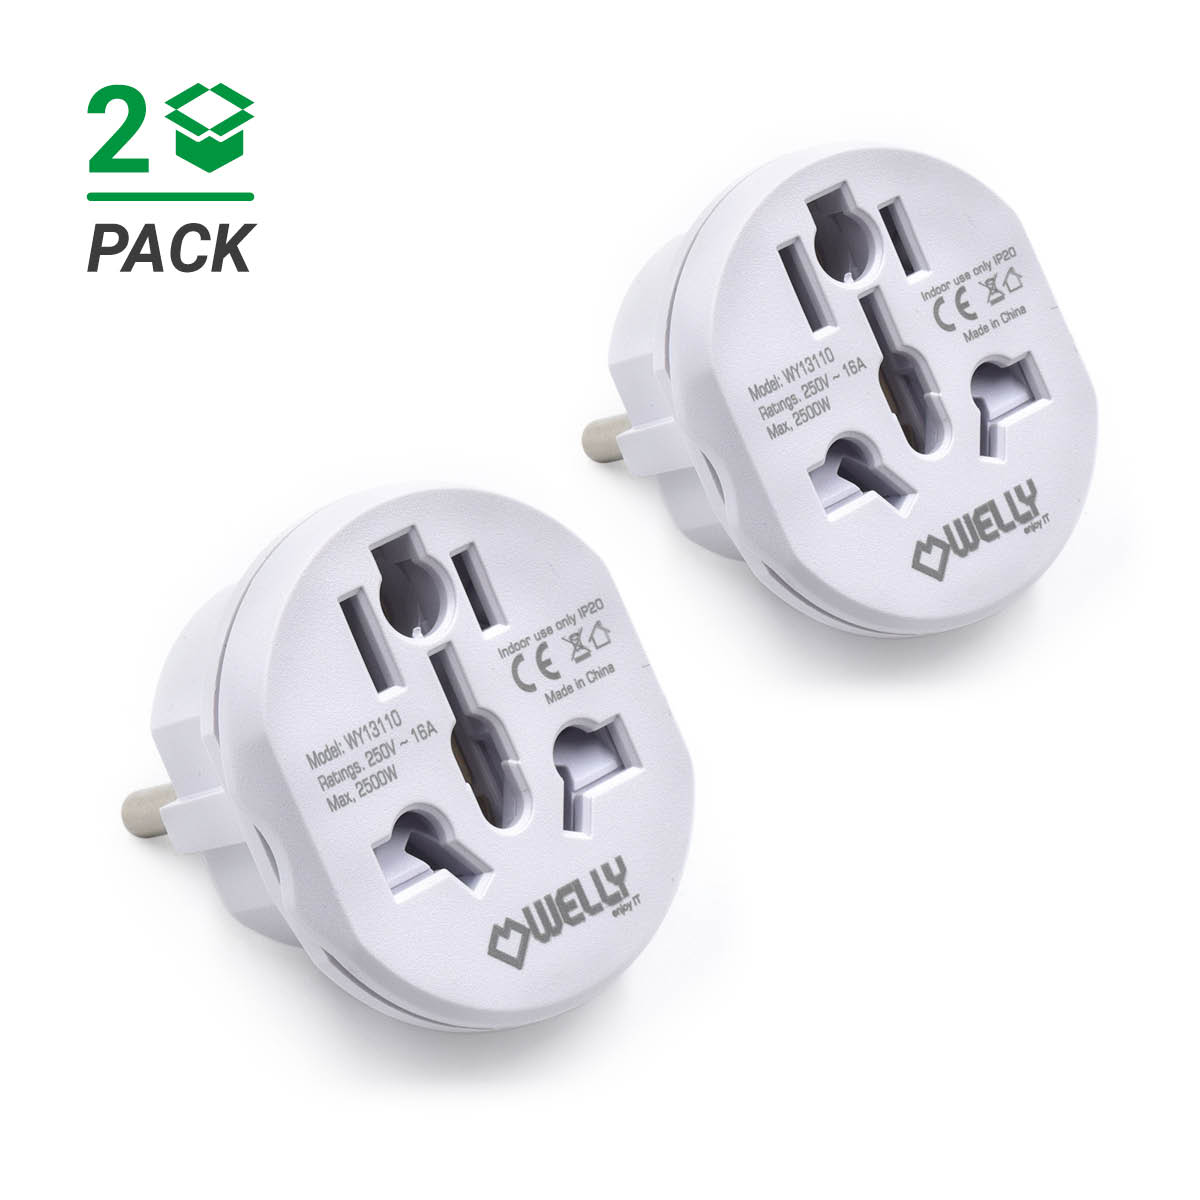 European Plug Adapter Set - For all of Europe Outlet including the UK - 6  pack US to EU handy Plug Adapters